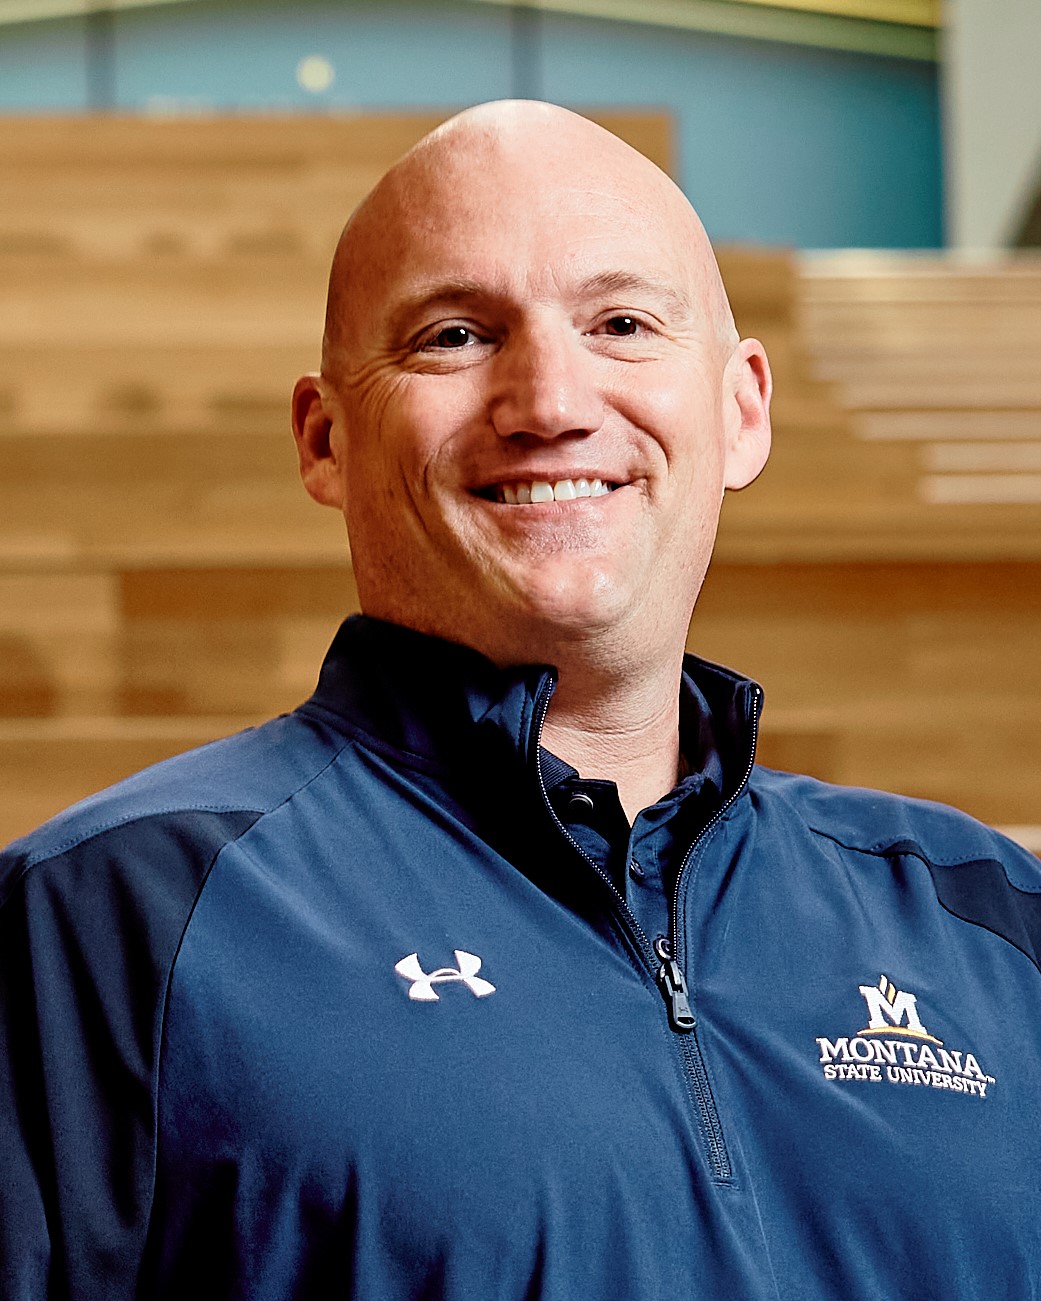 photo of man with a bald head and brown eyes wearing a blue Montana State University logo shirt, standing in front of wooden steps